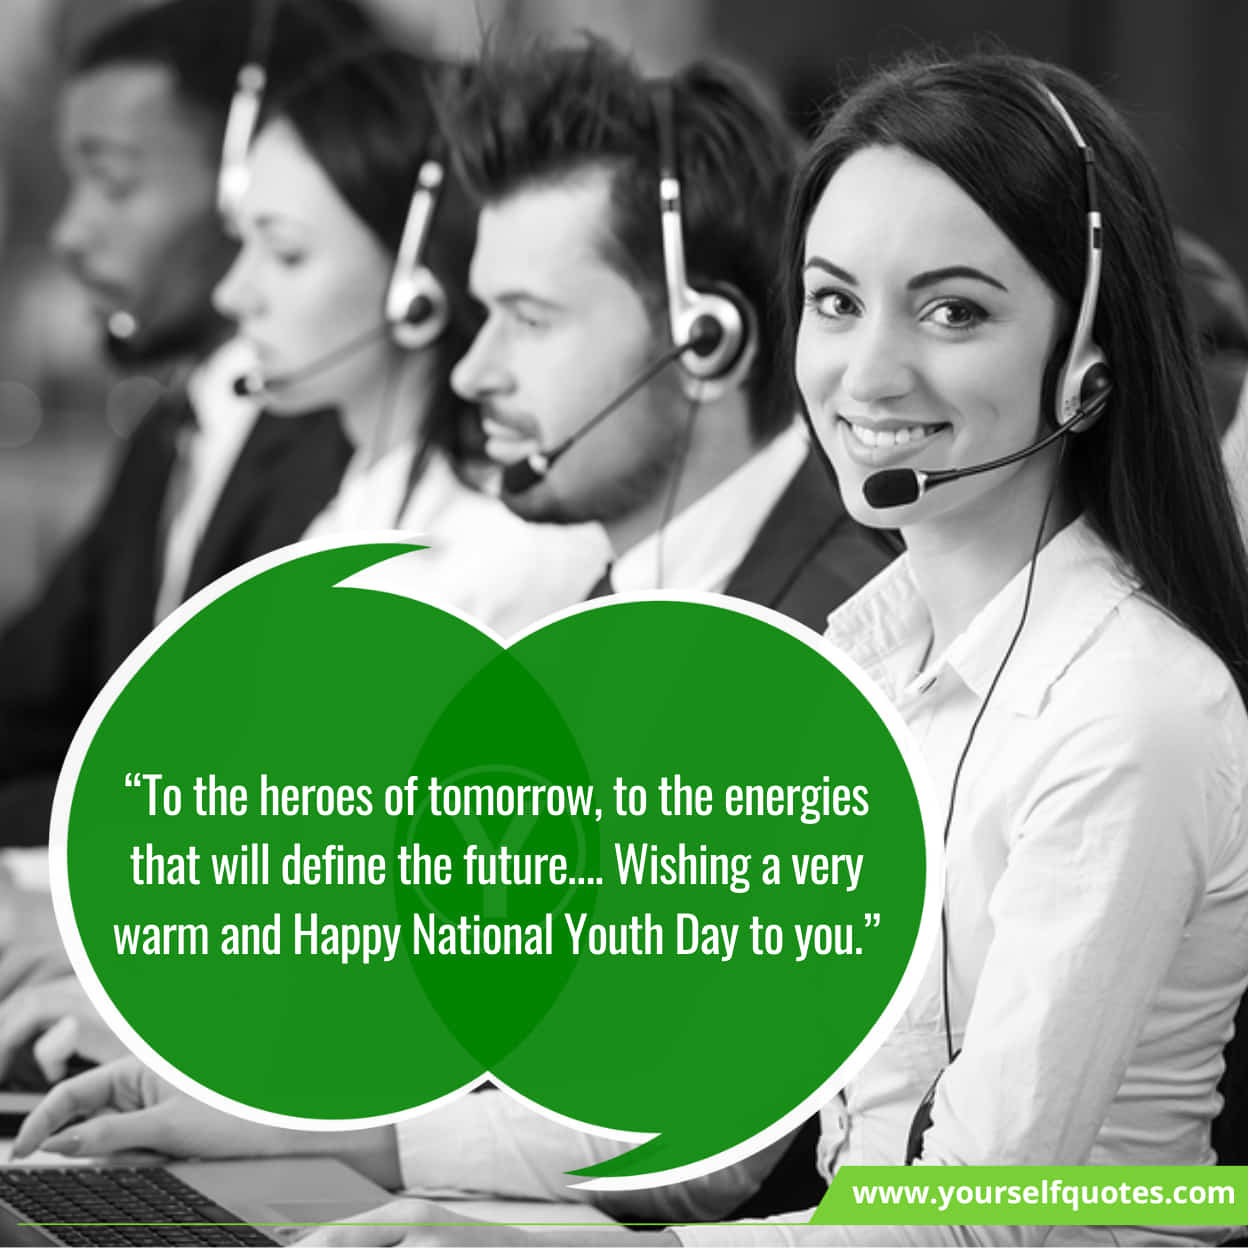 International Youth Day Wishes